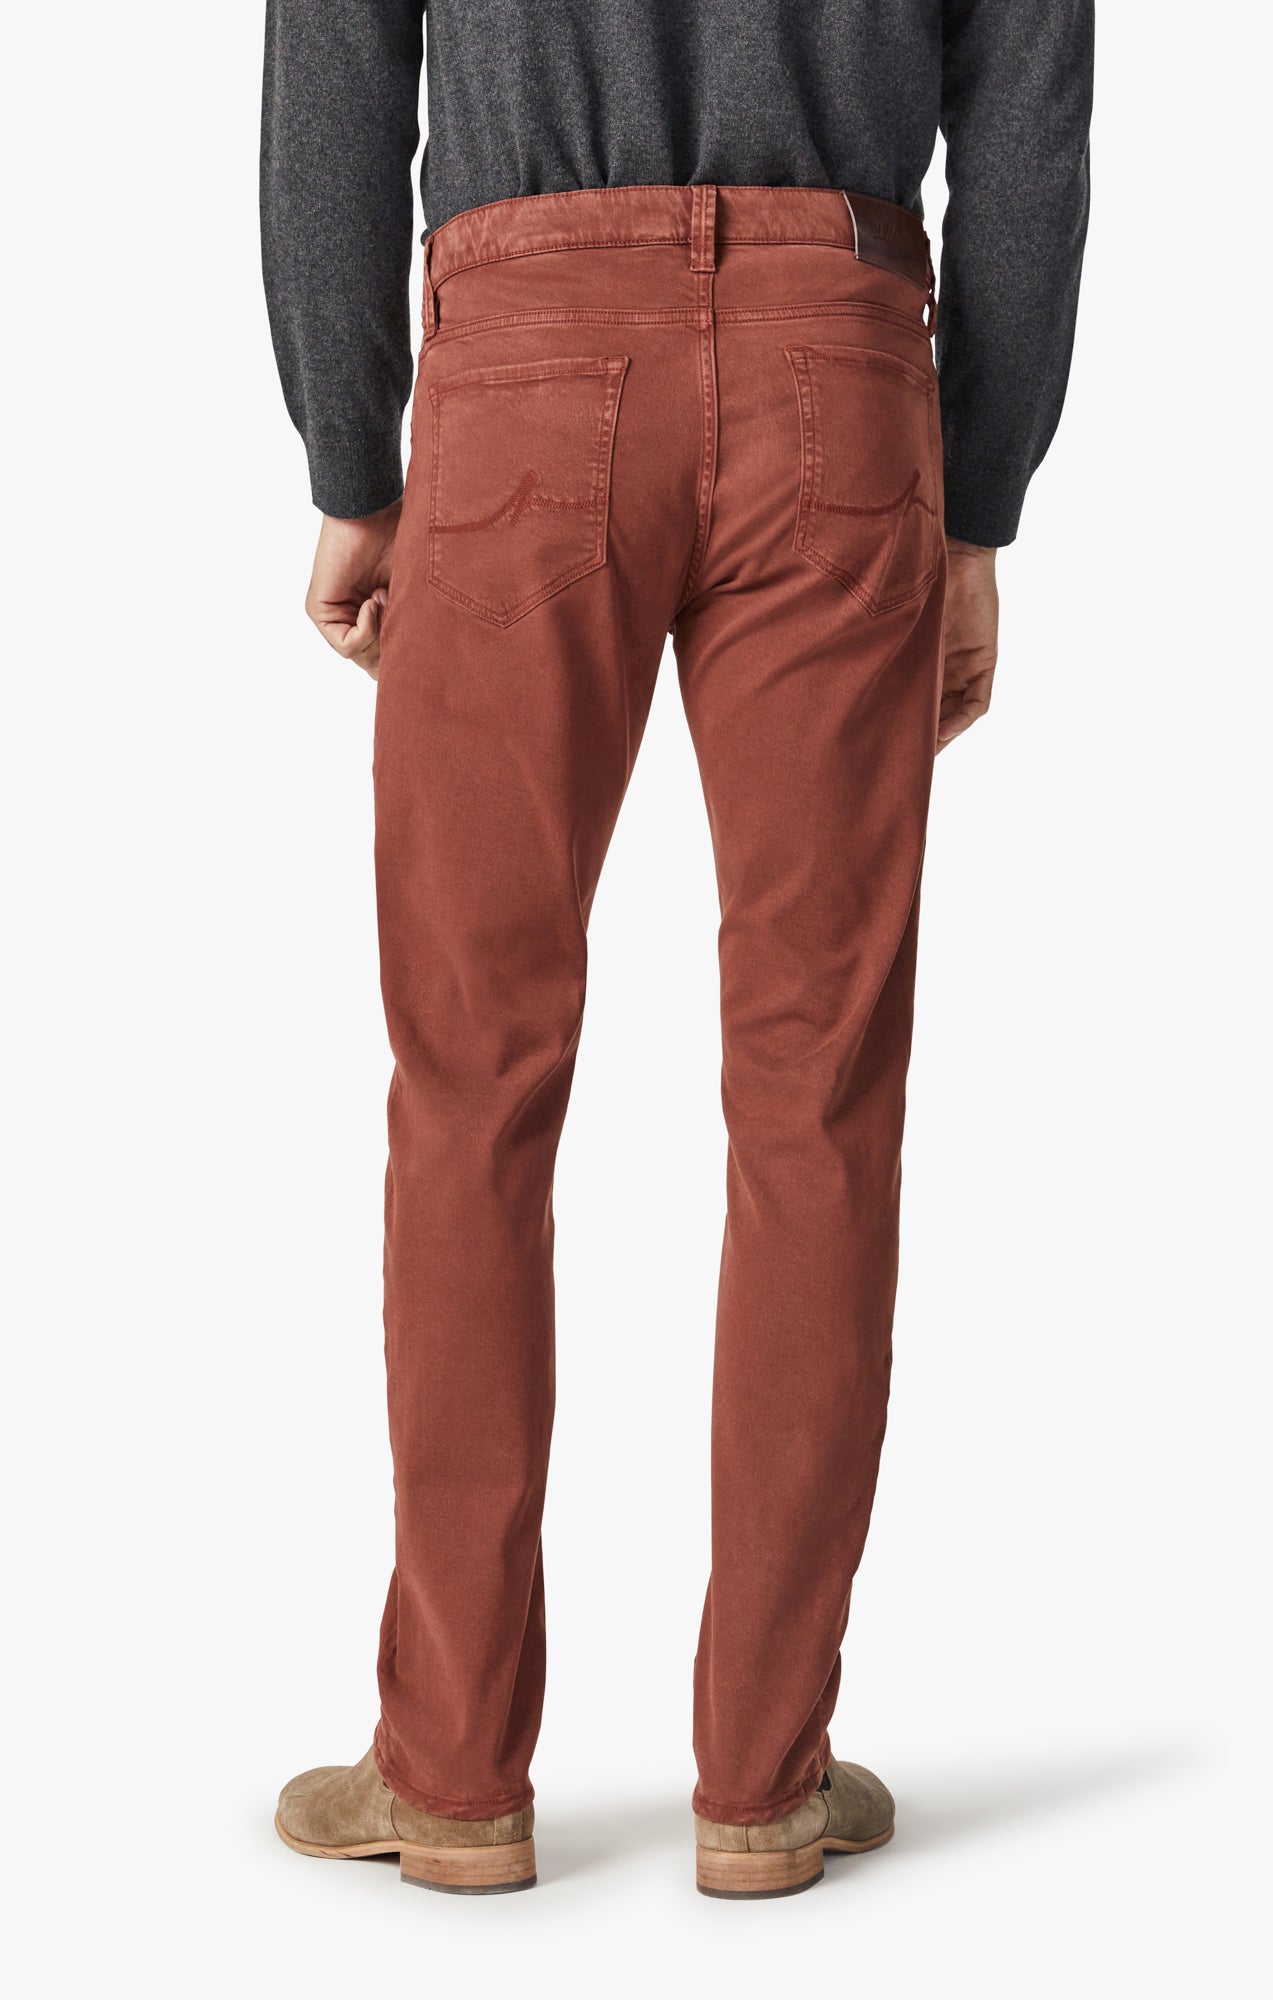 Cool Tapered Leg Pants in Cinnamon Brushed Twill Image 4